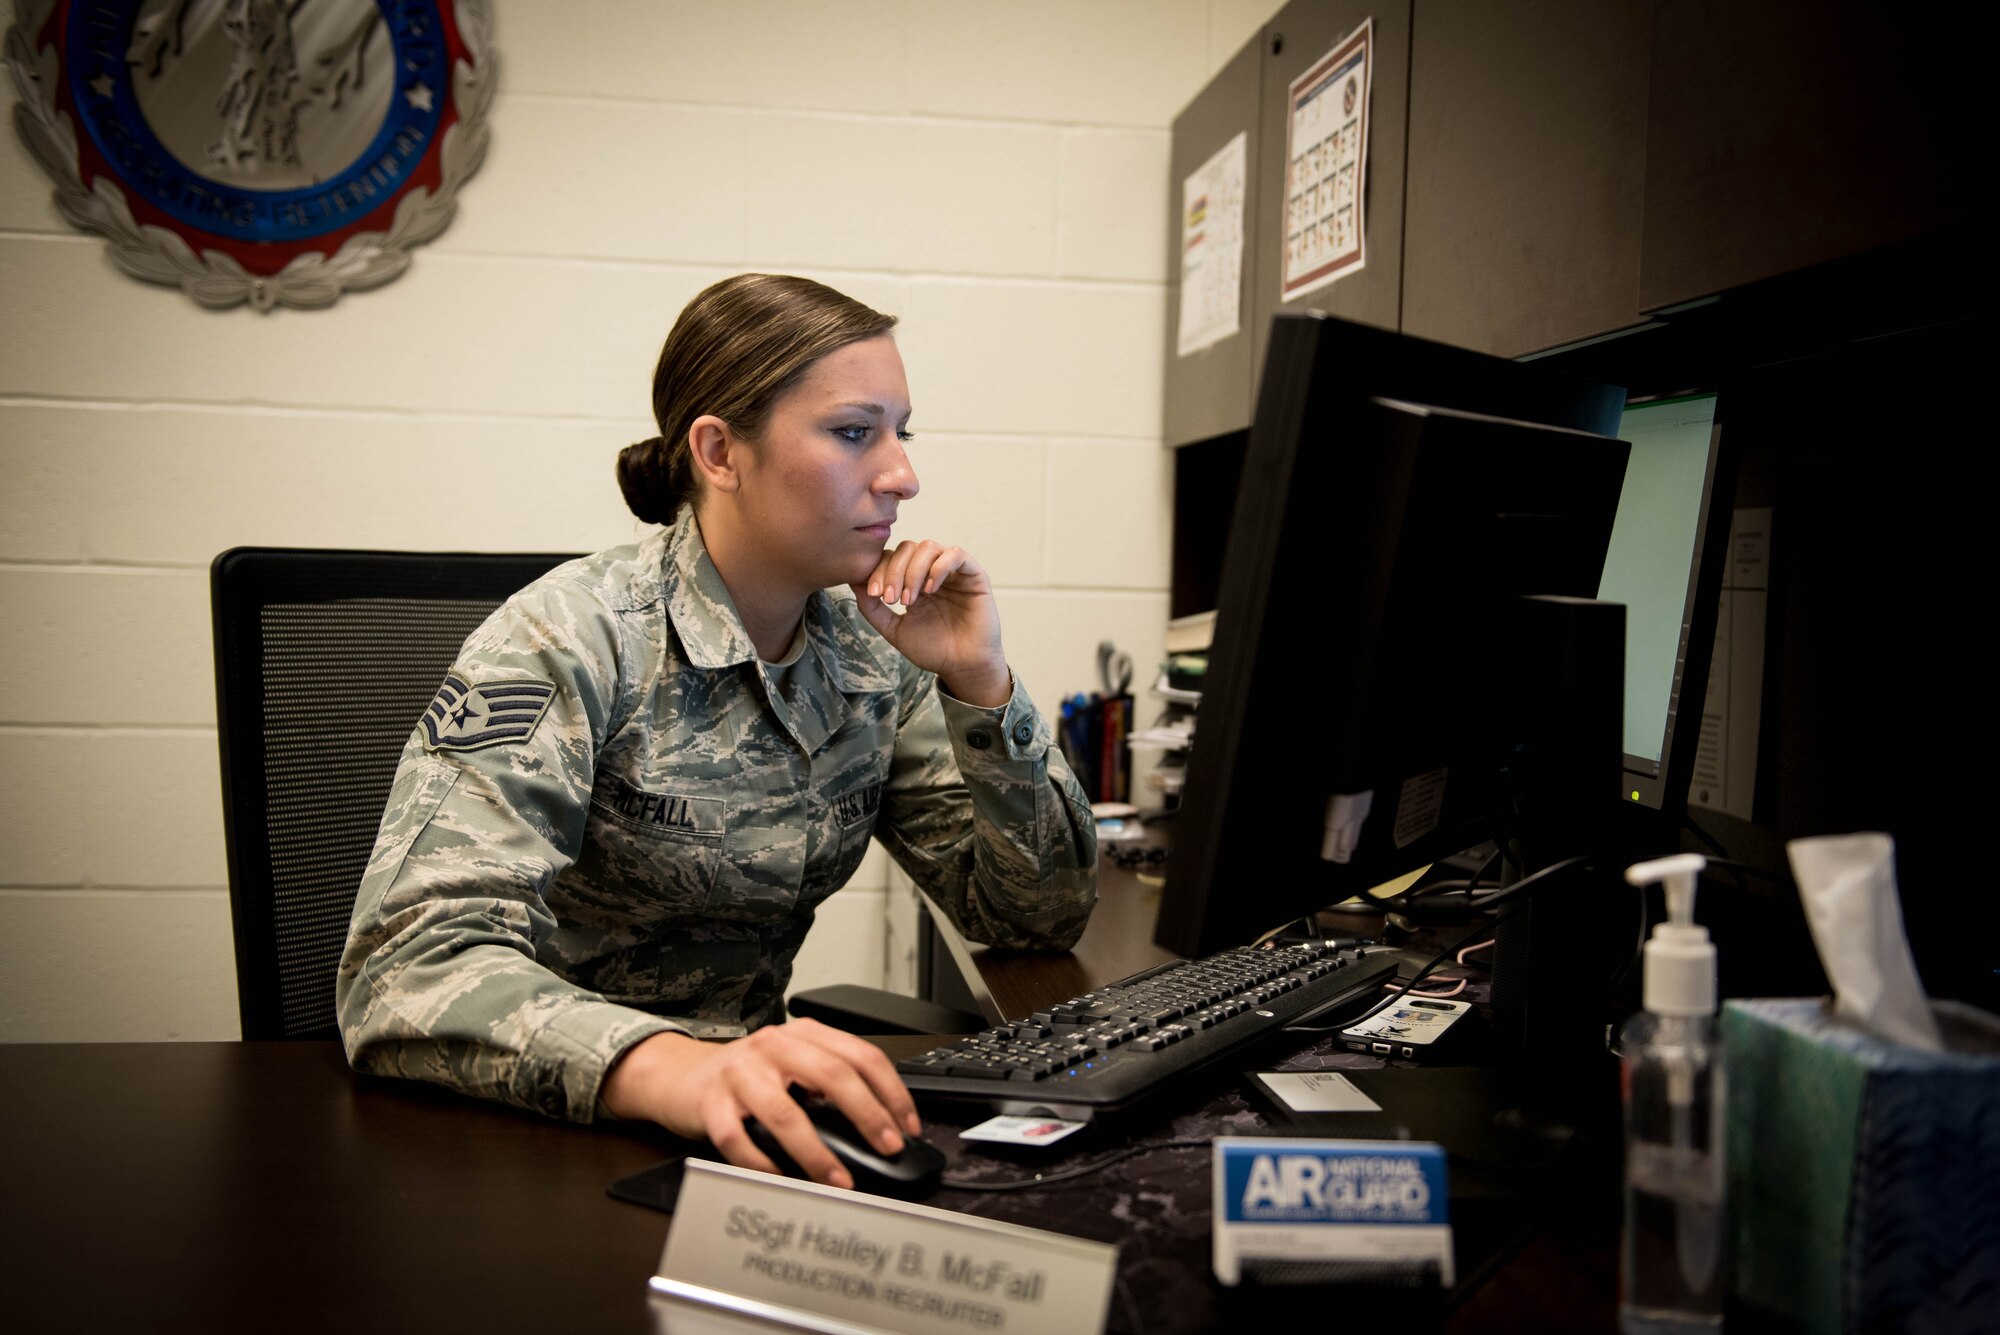 Sergeant McFall looking at her computer monitor at her desk at work.